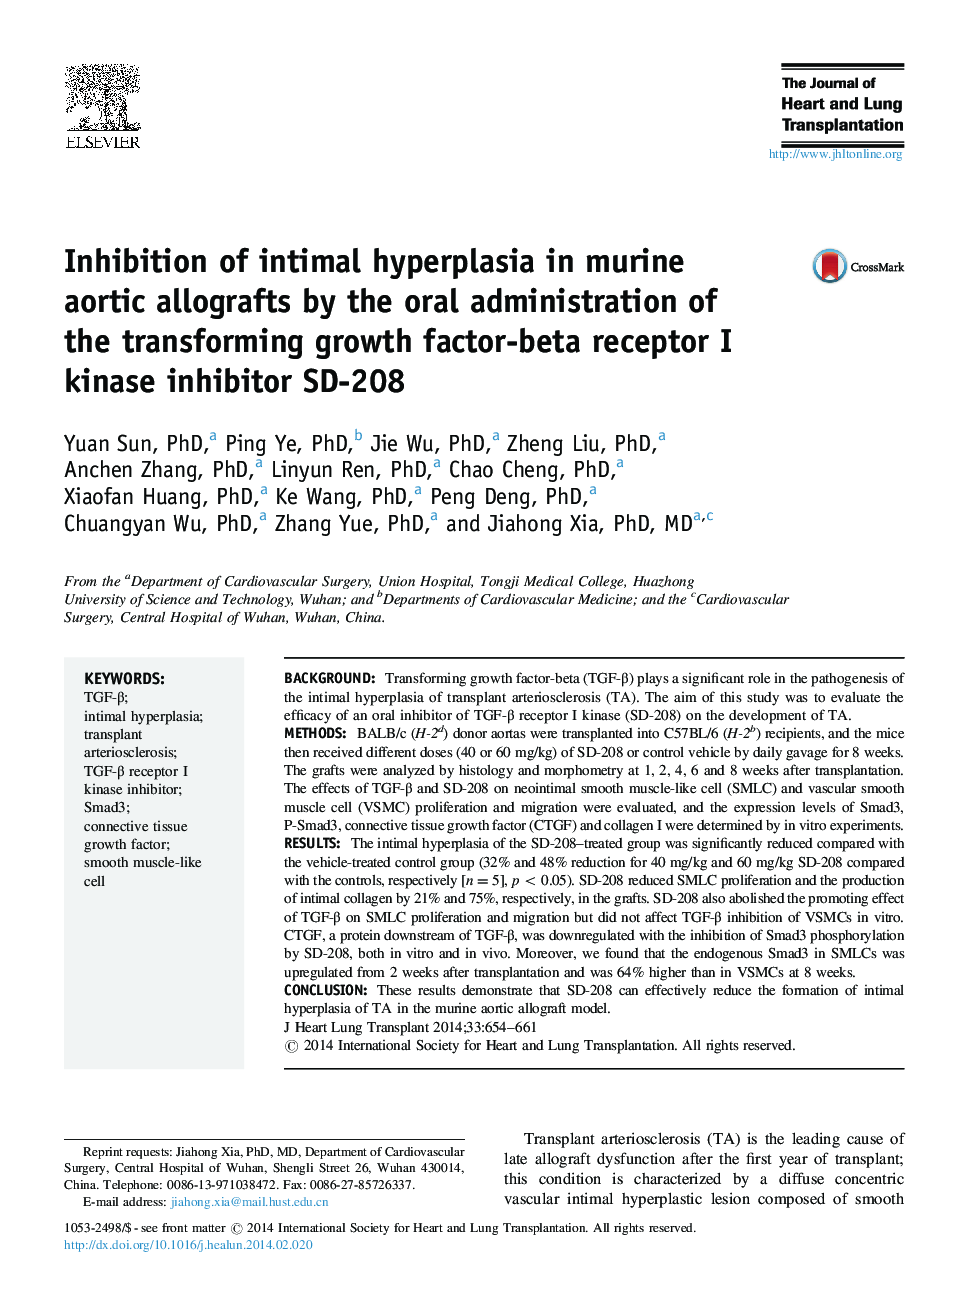 Inhibition of intimal hyperplasia in murine aortic allografts by the oral administration of the transforming growth factor-beta receptor I kinase inhibitor SD-208